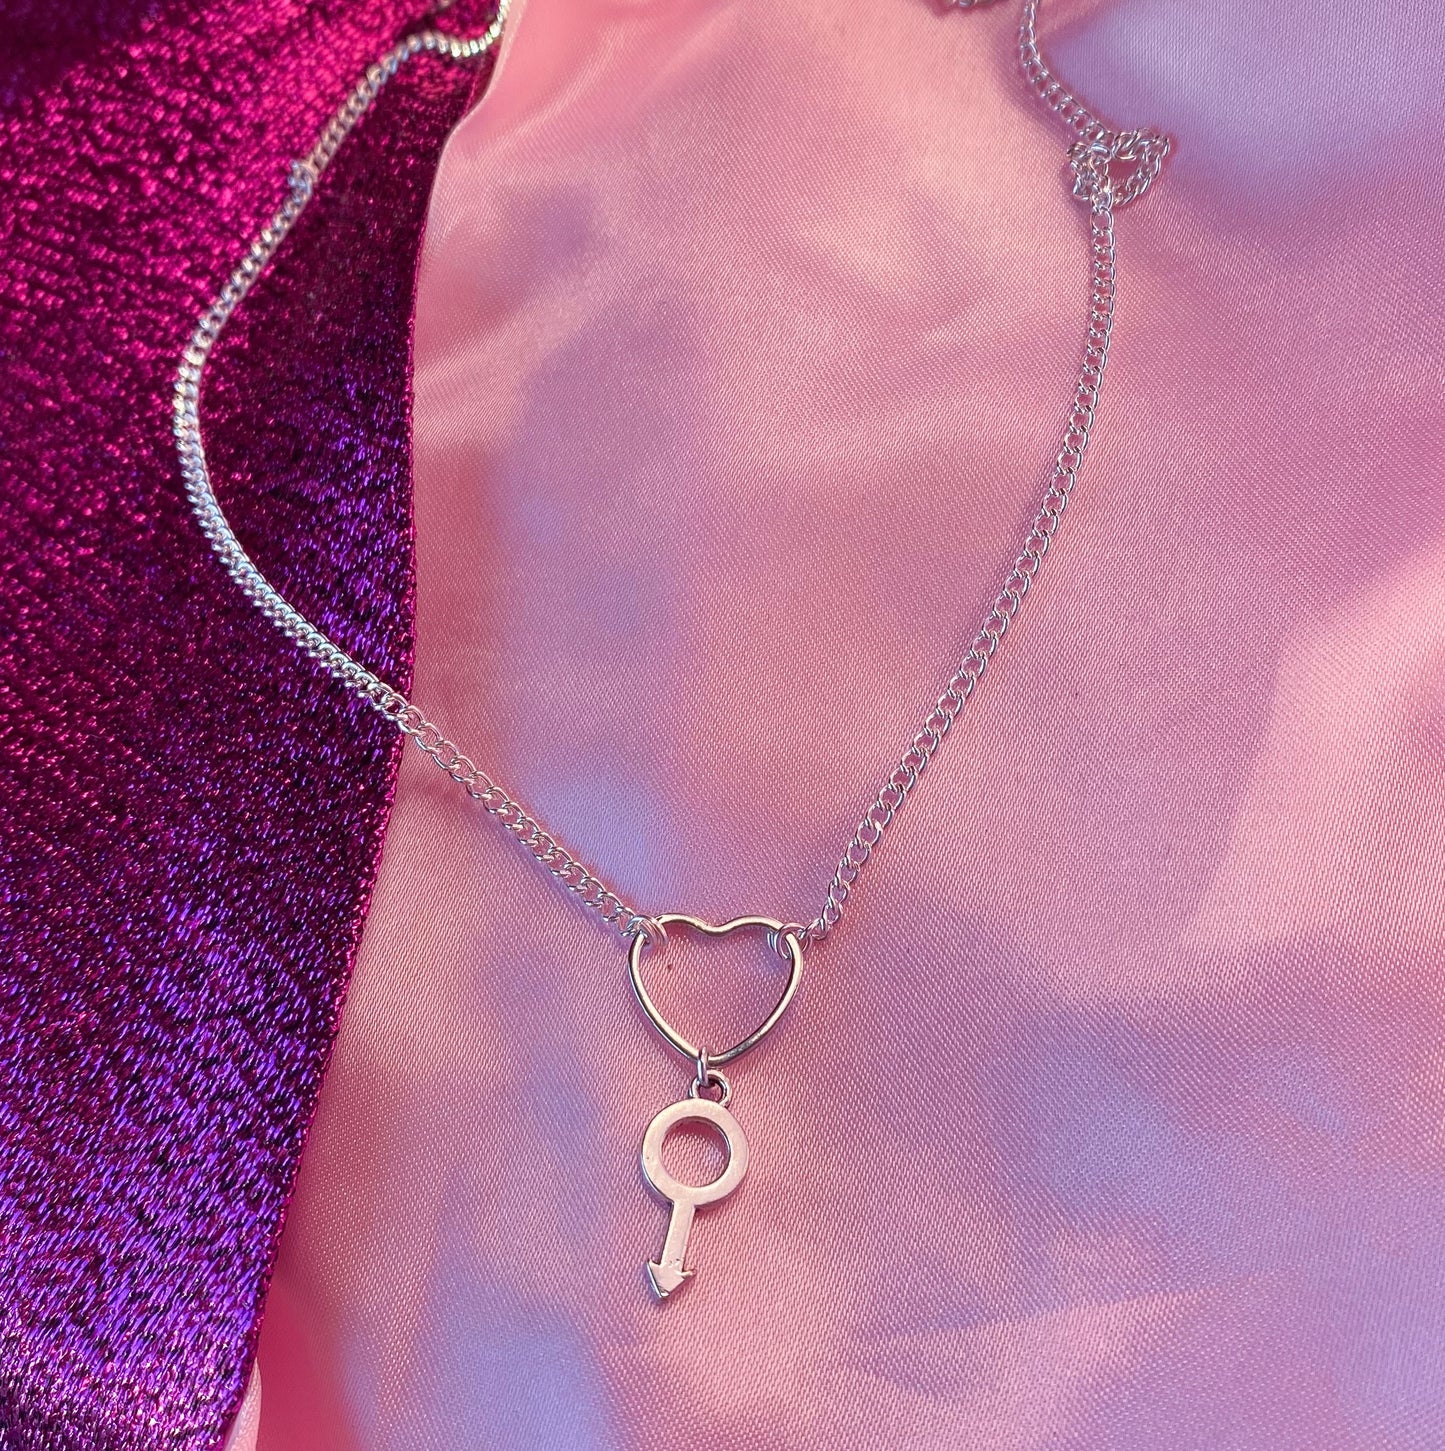 Mars symbol and love heart necklace